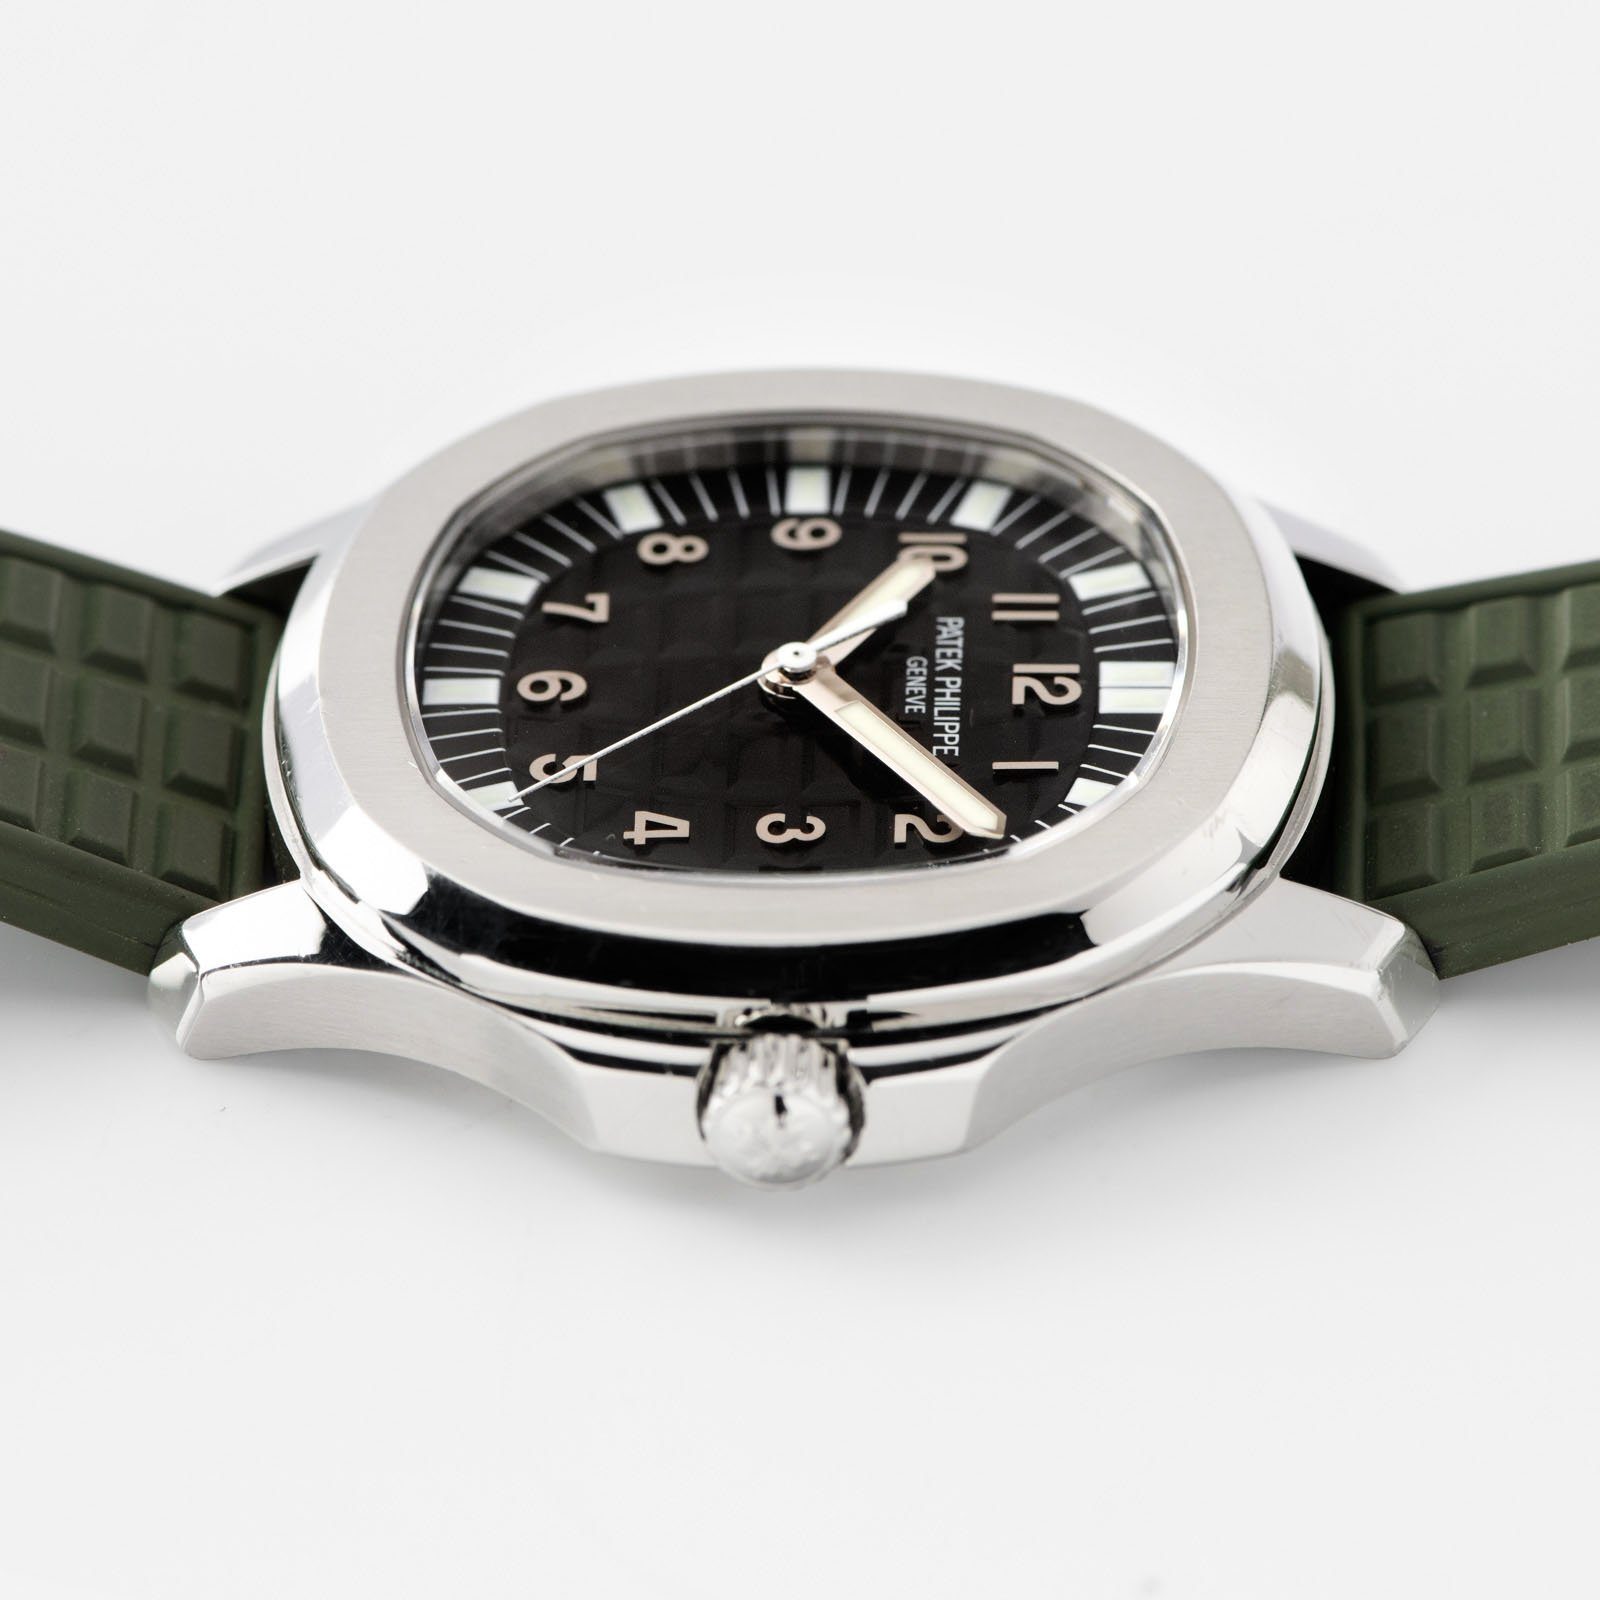 Patek Philippe Aquanaut Reference 5065 in Steel